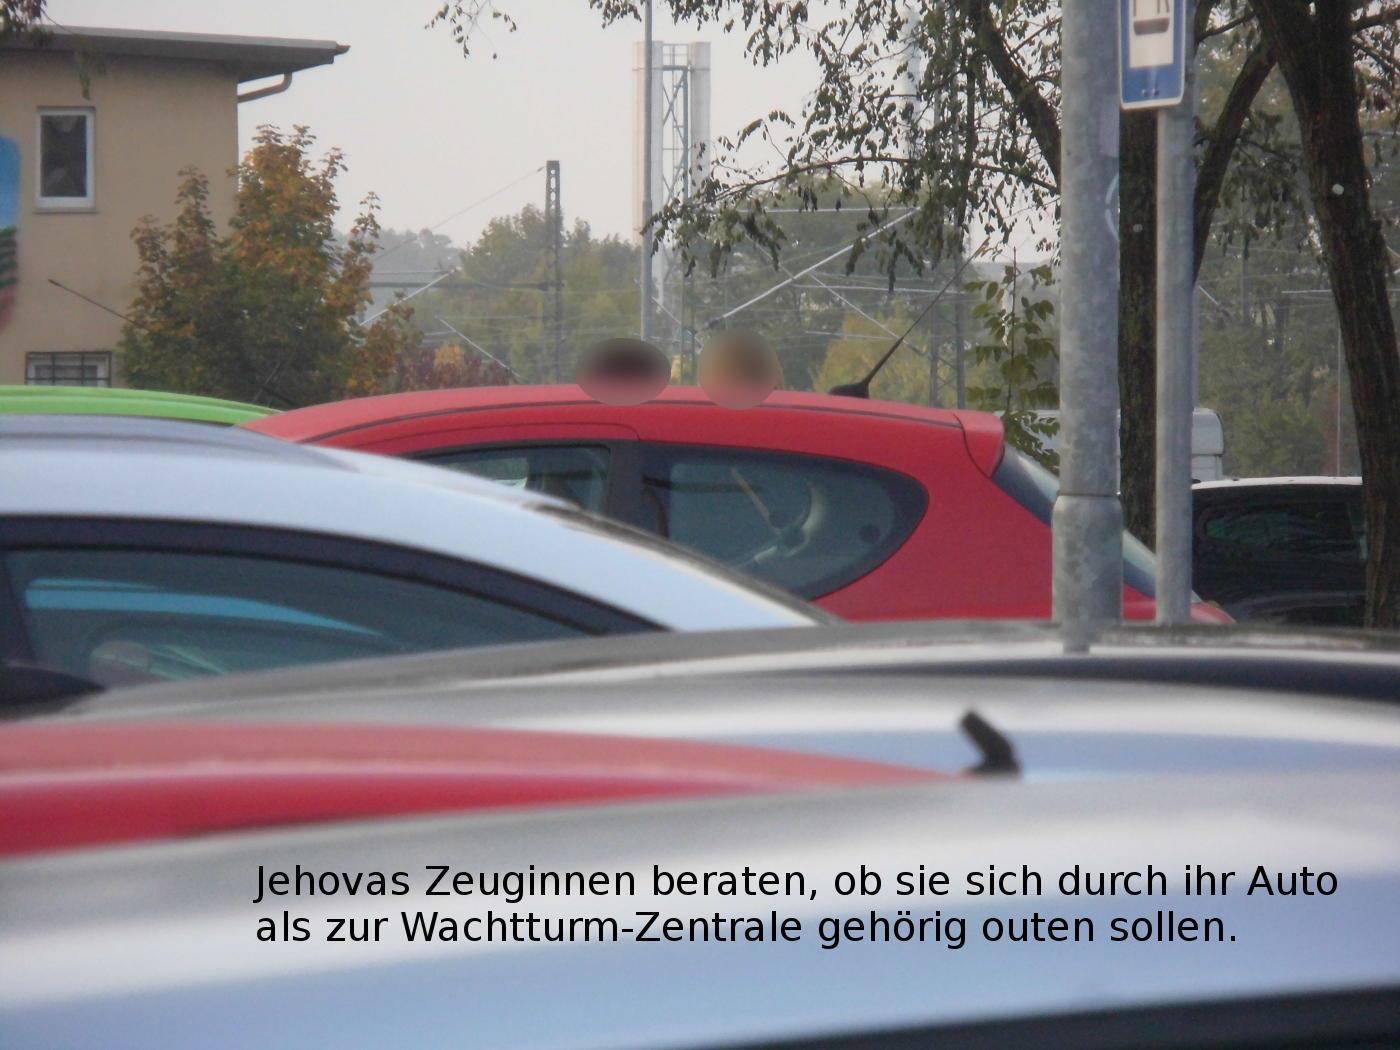 Jehovah's Witnesses from Selters in Wiesloch